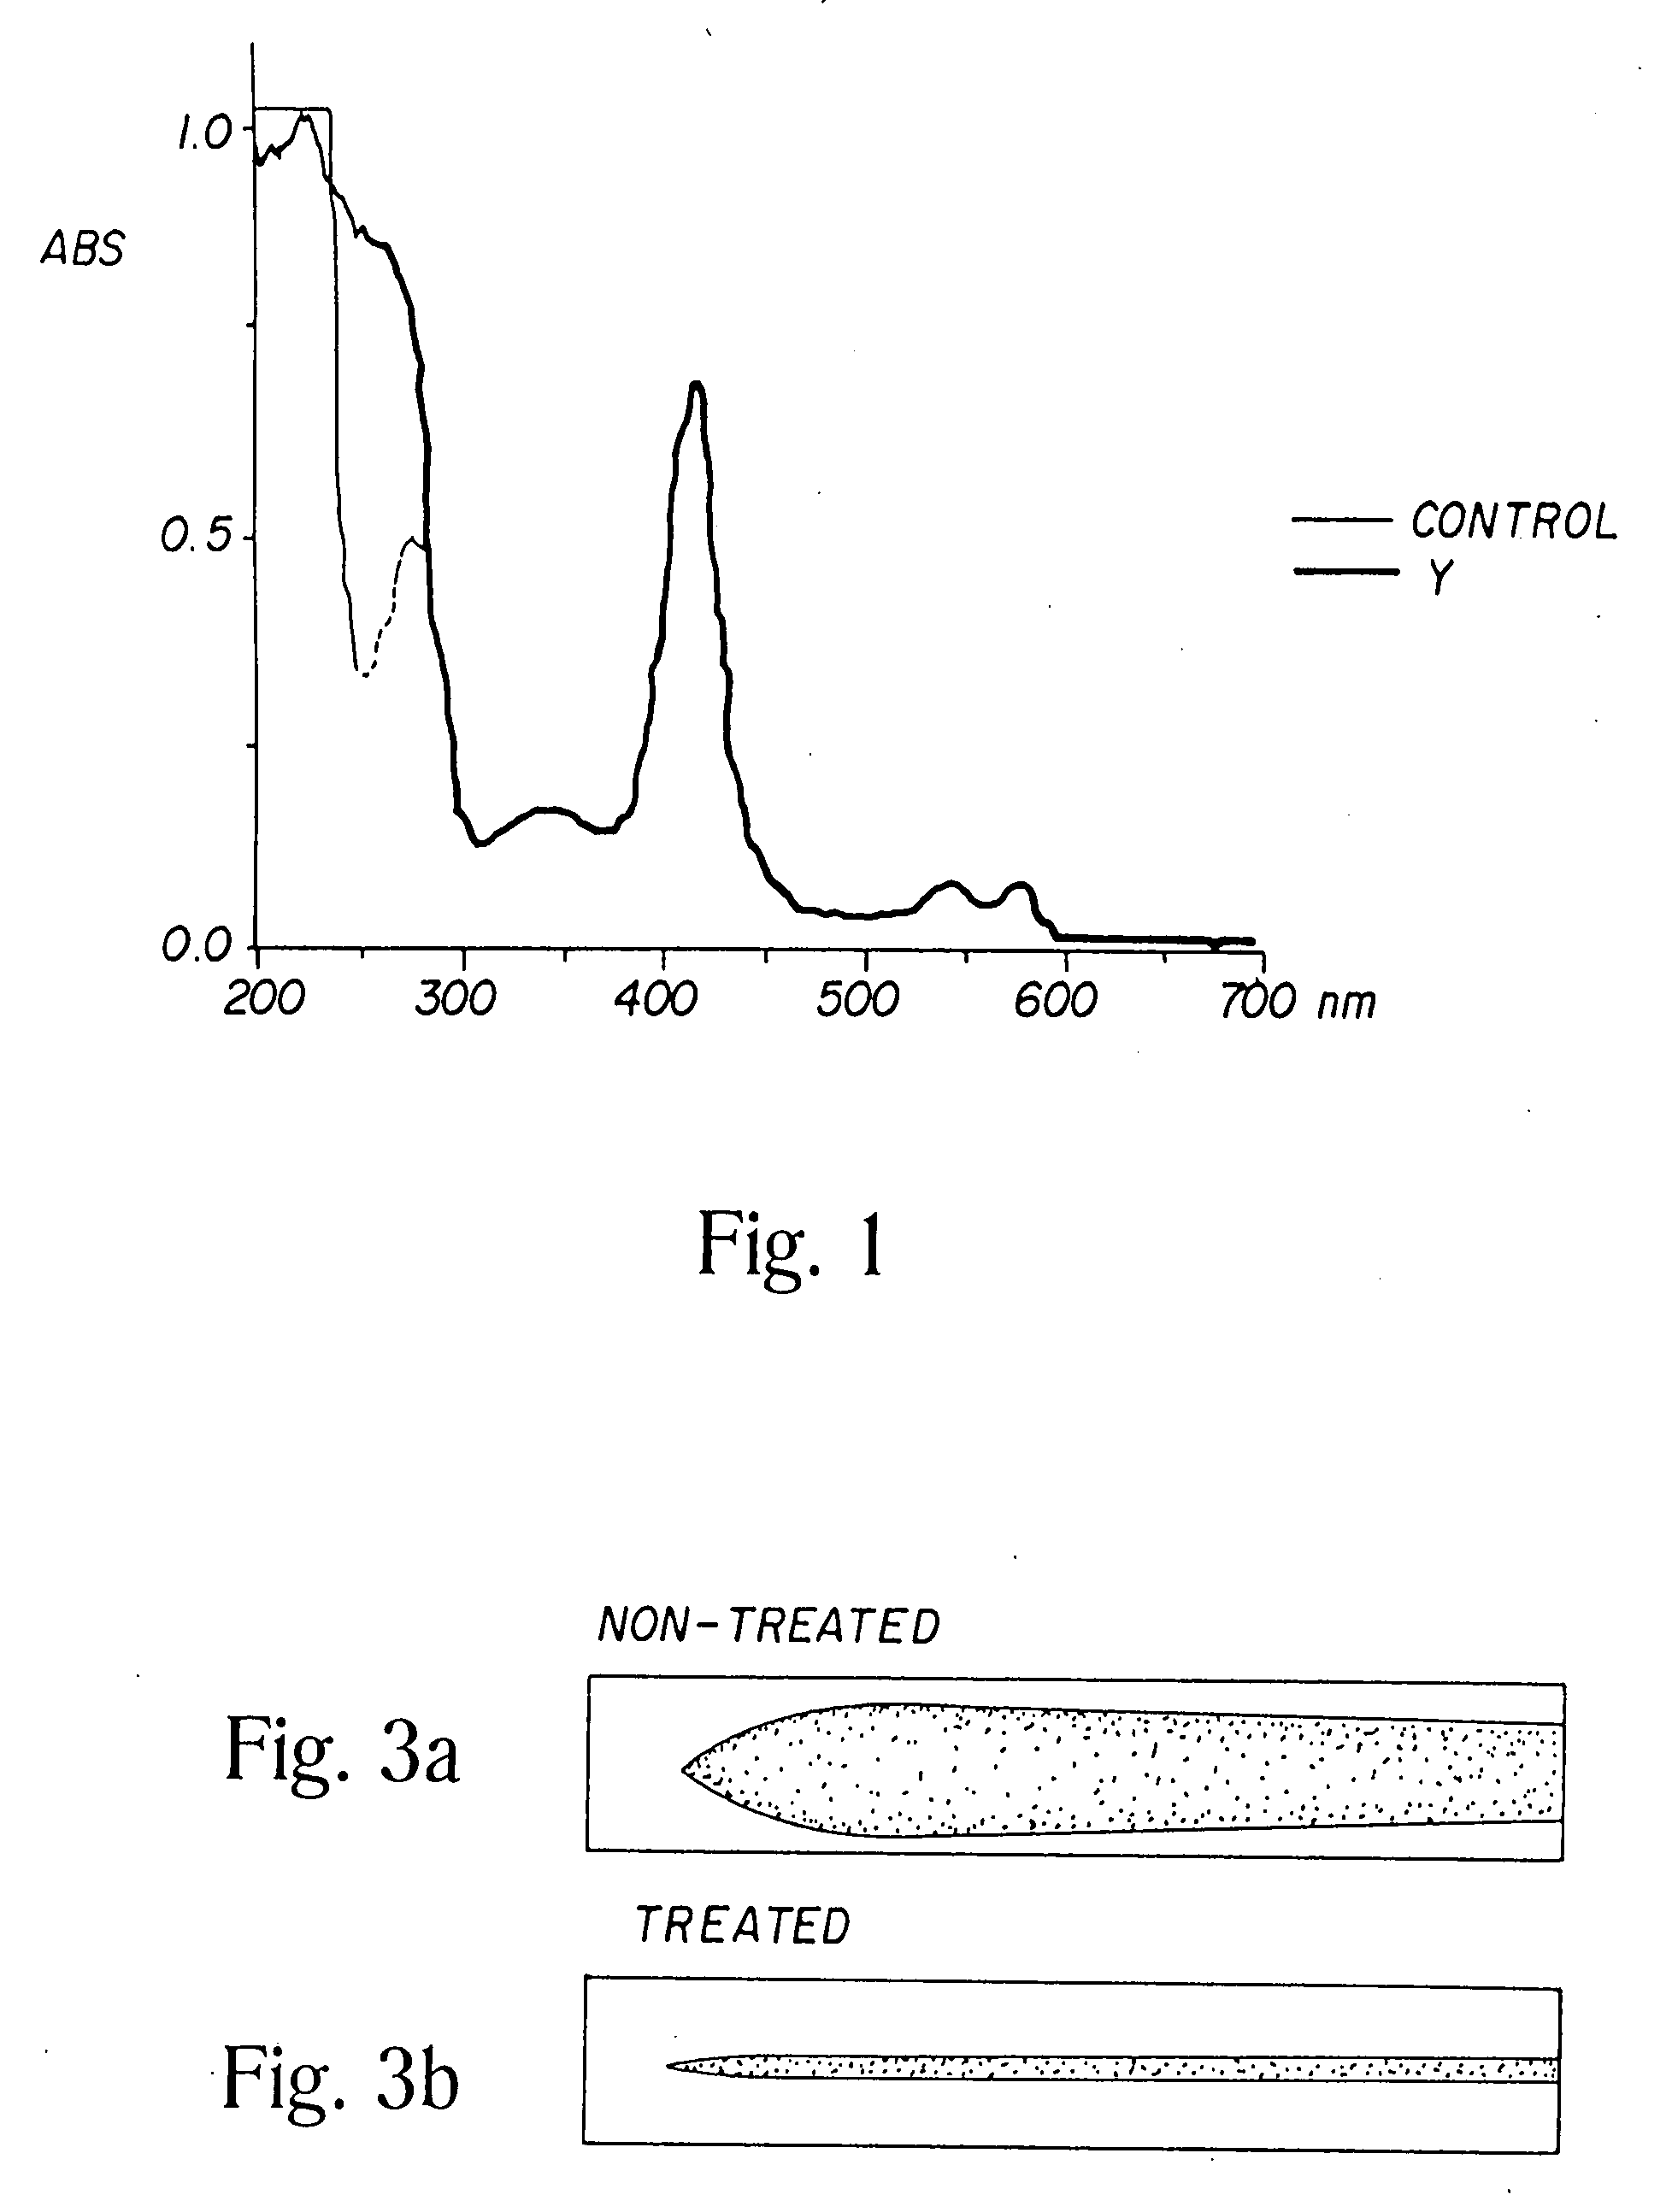 Inhibitory or blocking agents of molecular generating and/or/ inducing functions